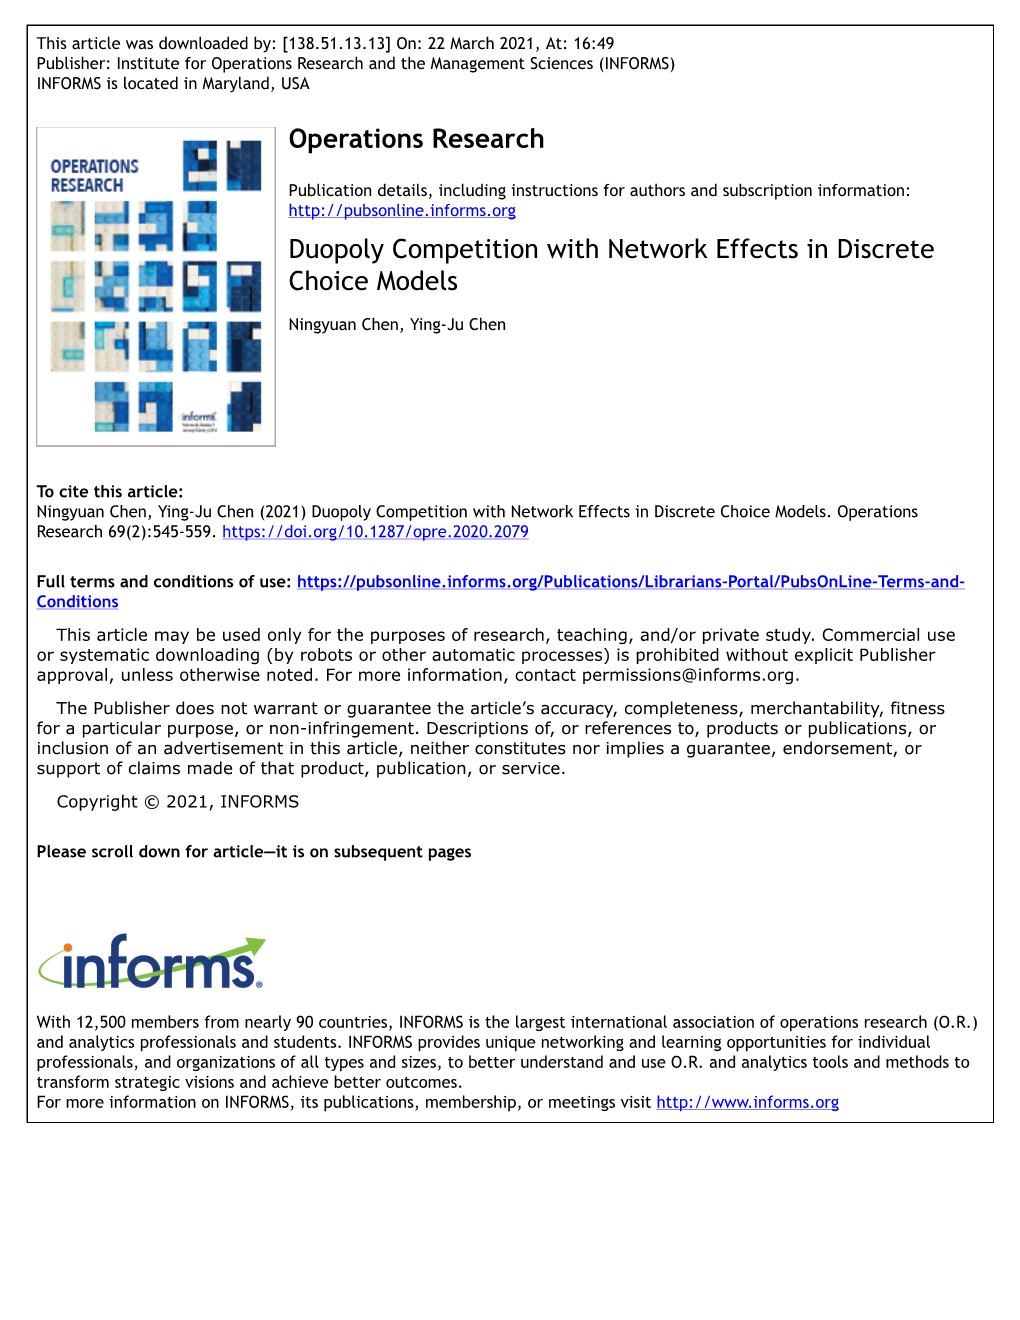 Duopoly Competition with Network Effects in Discrete Choice Models